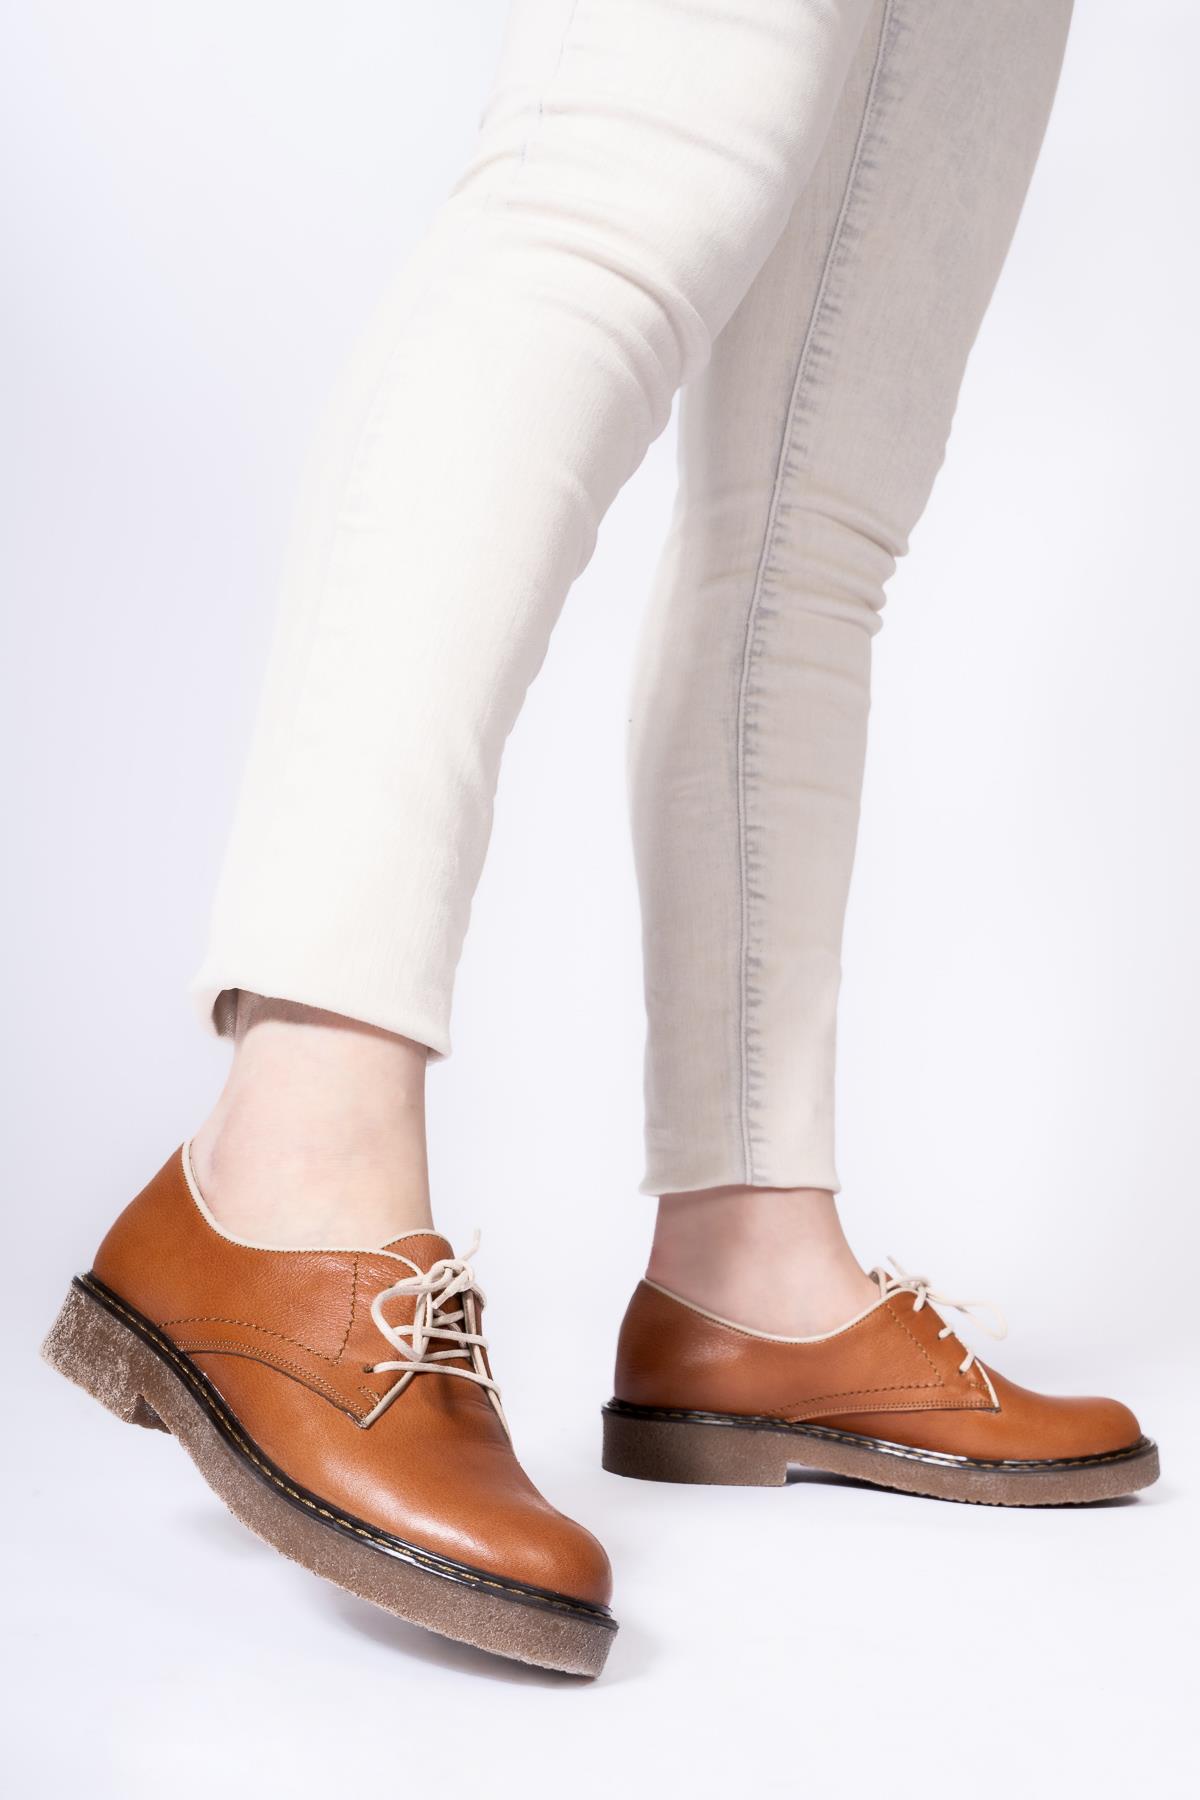 Women's Genuine Leather Casual